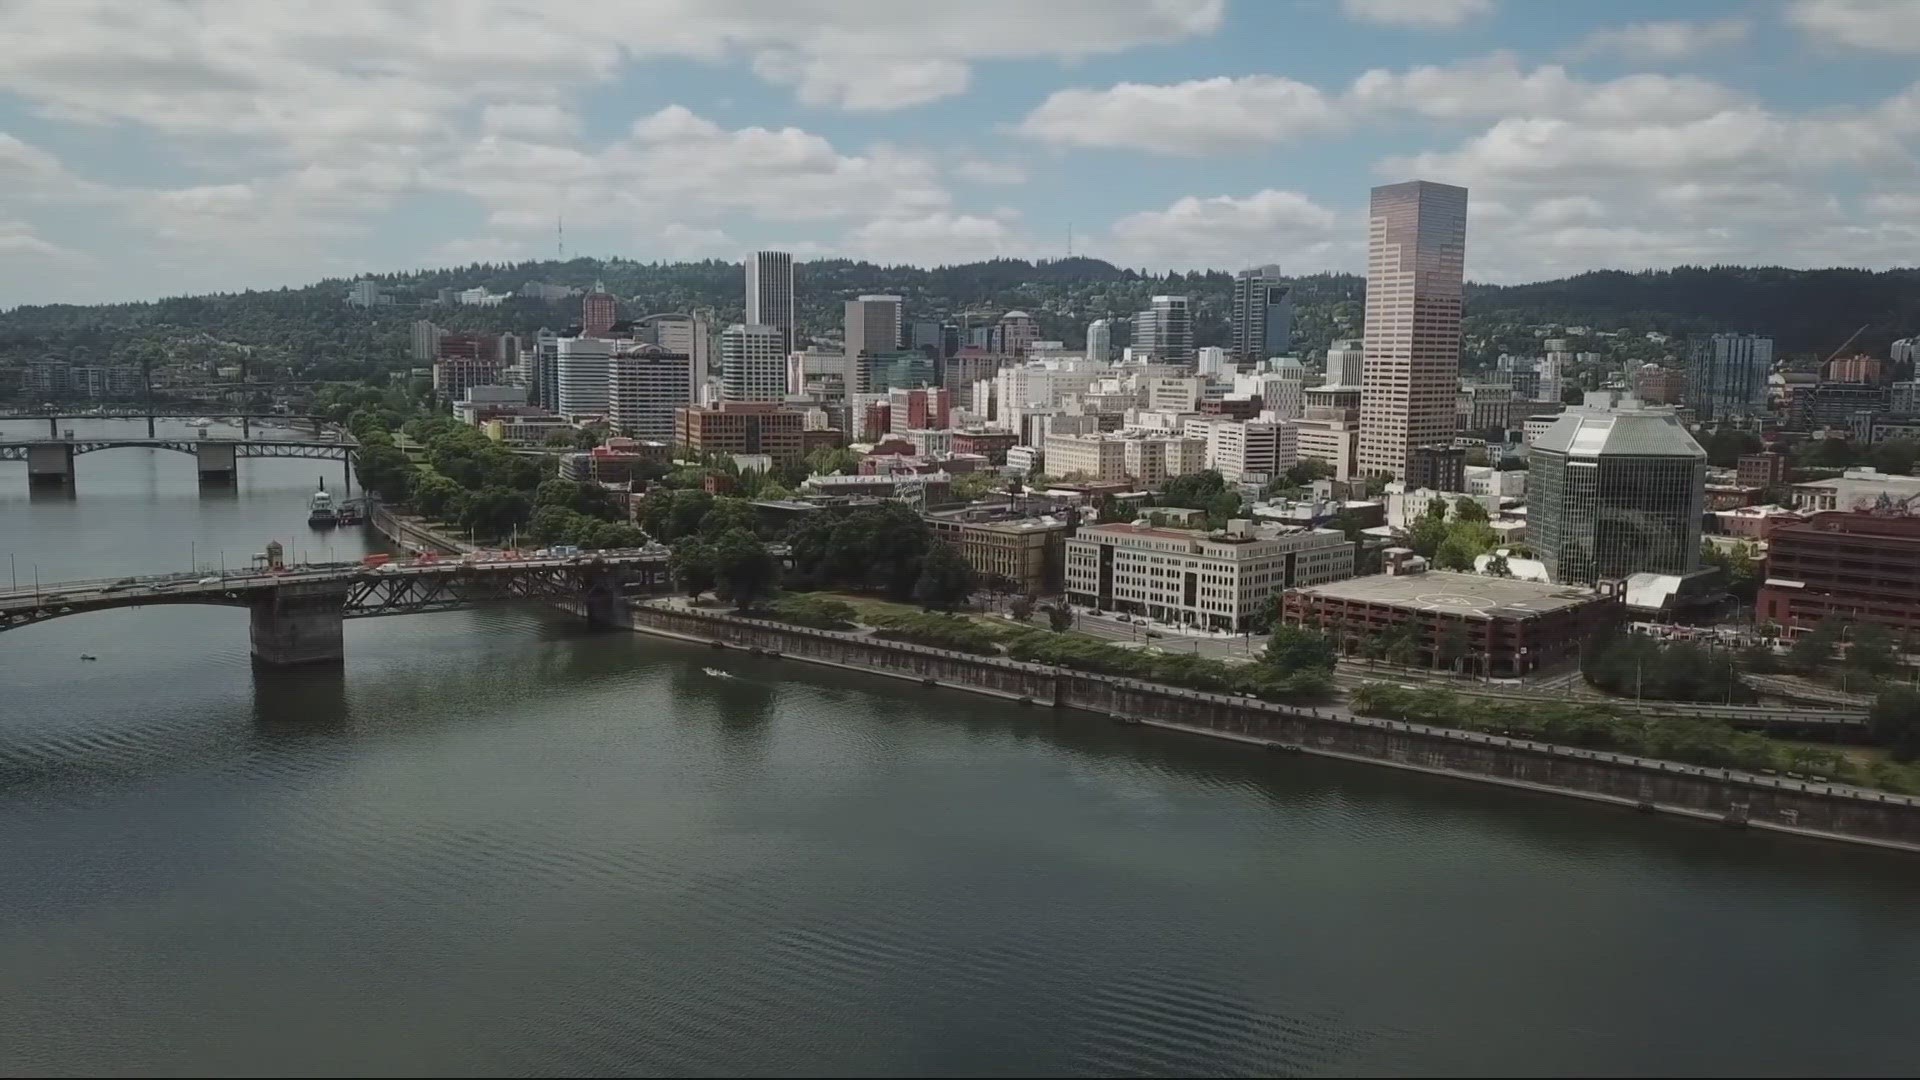 Some help may come in the form of increased Clean & Safe patrols in downtown Portland's hospitality core. It wants to add 14 to 15 public safety coordinators.